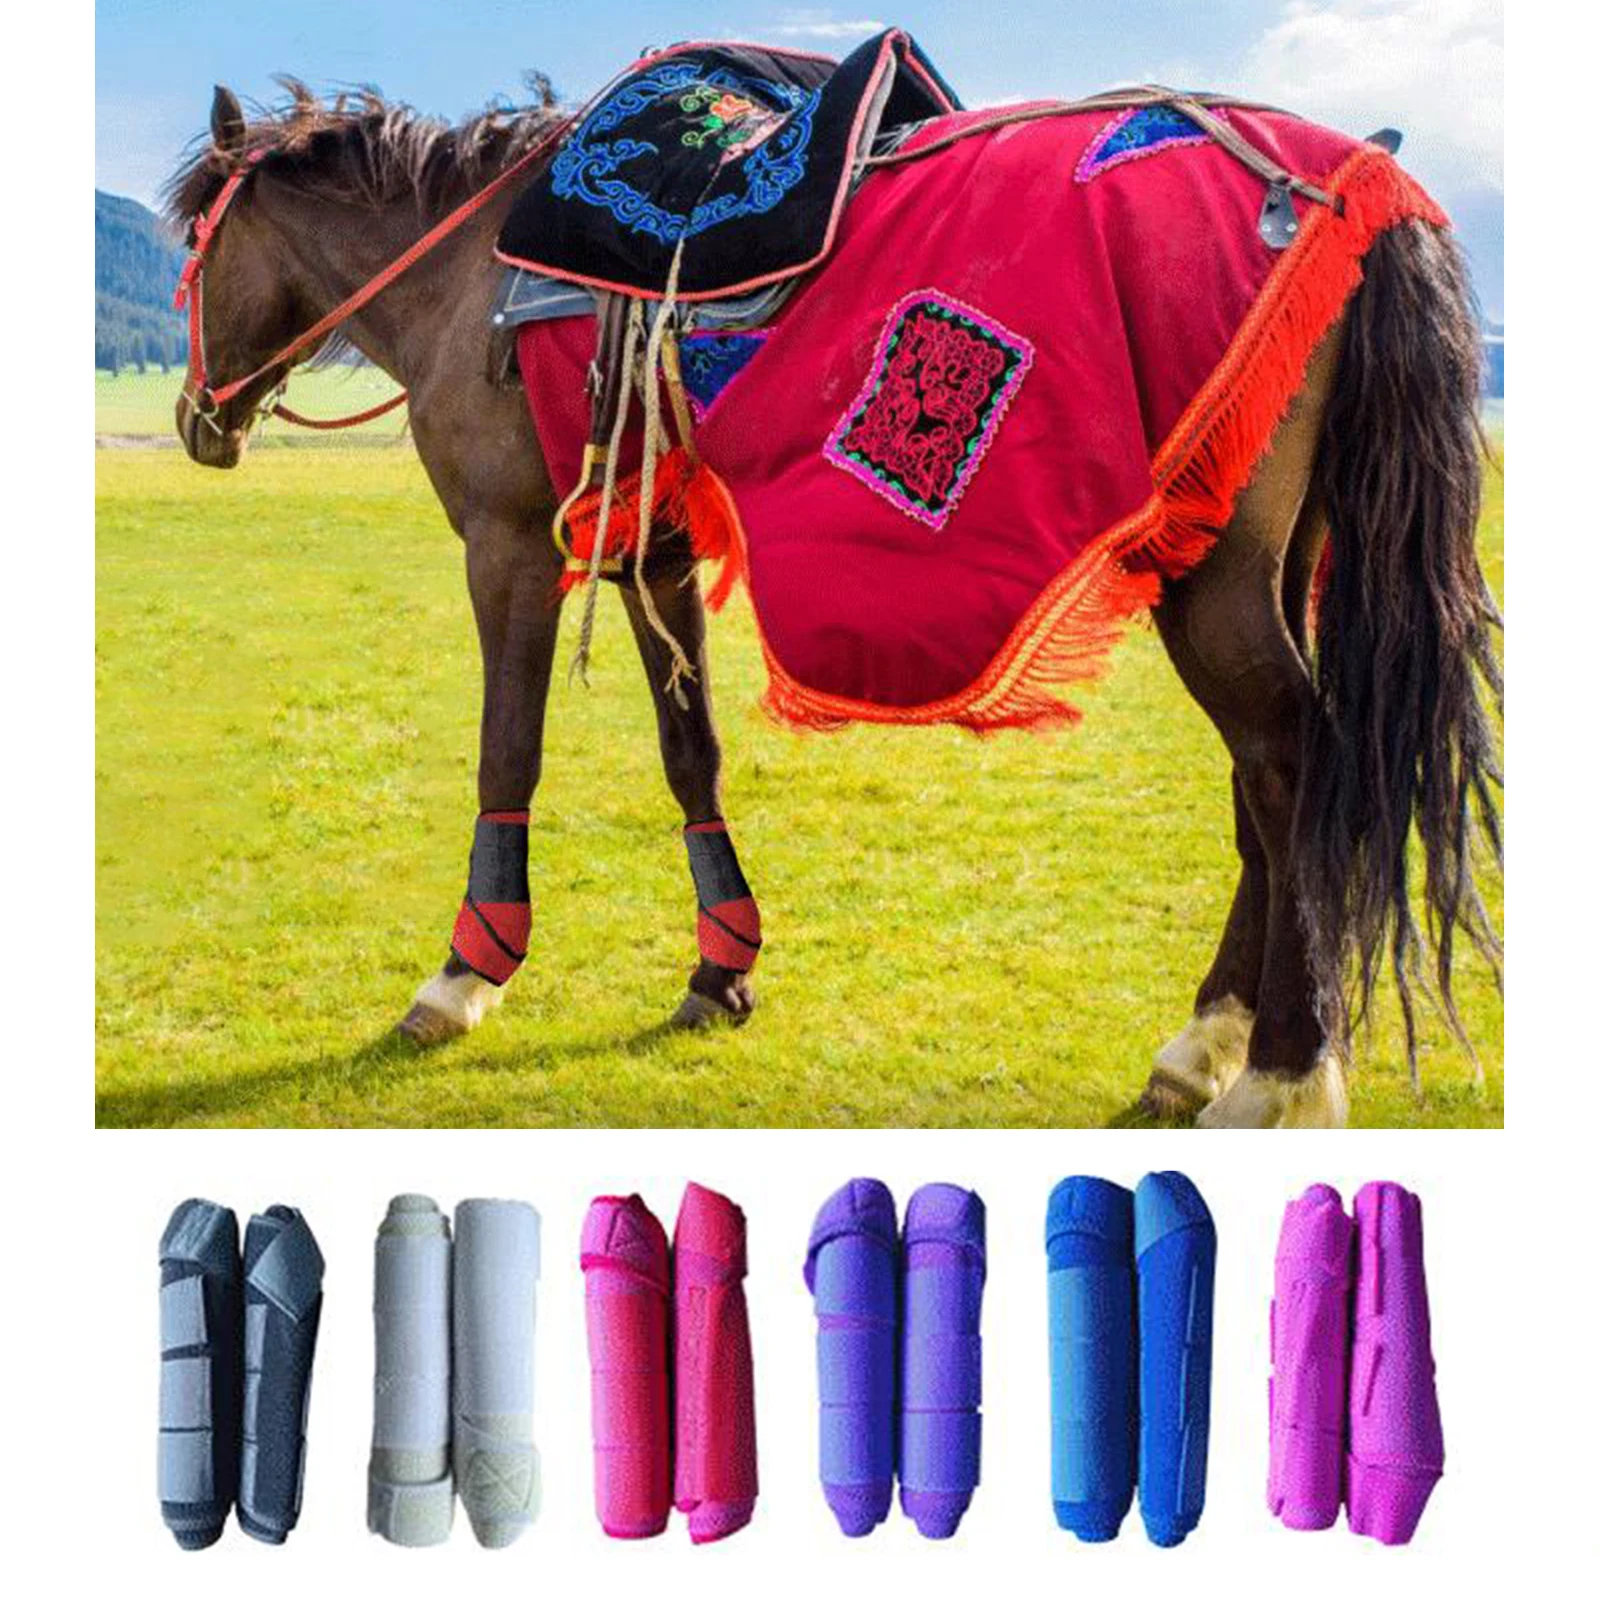 Horse Pony Tendon Boots Equestrain Front Rear Legs Protect Support Brushing Boot